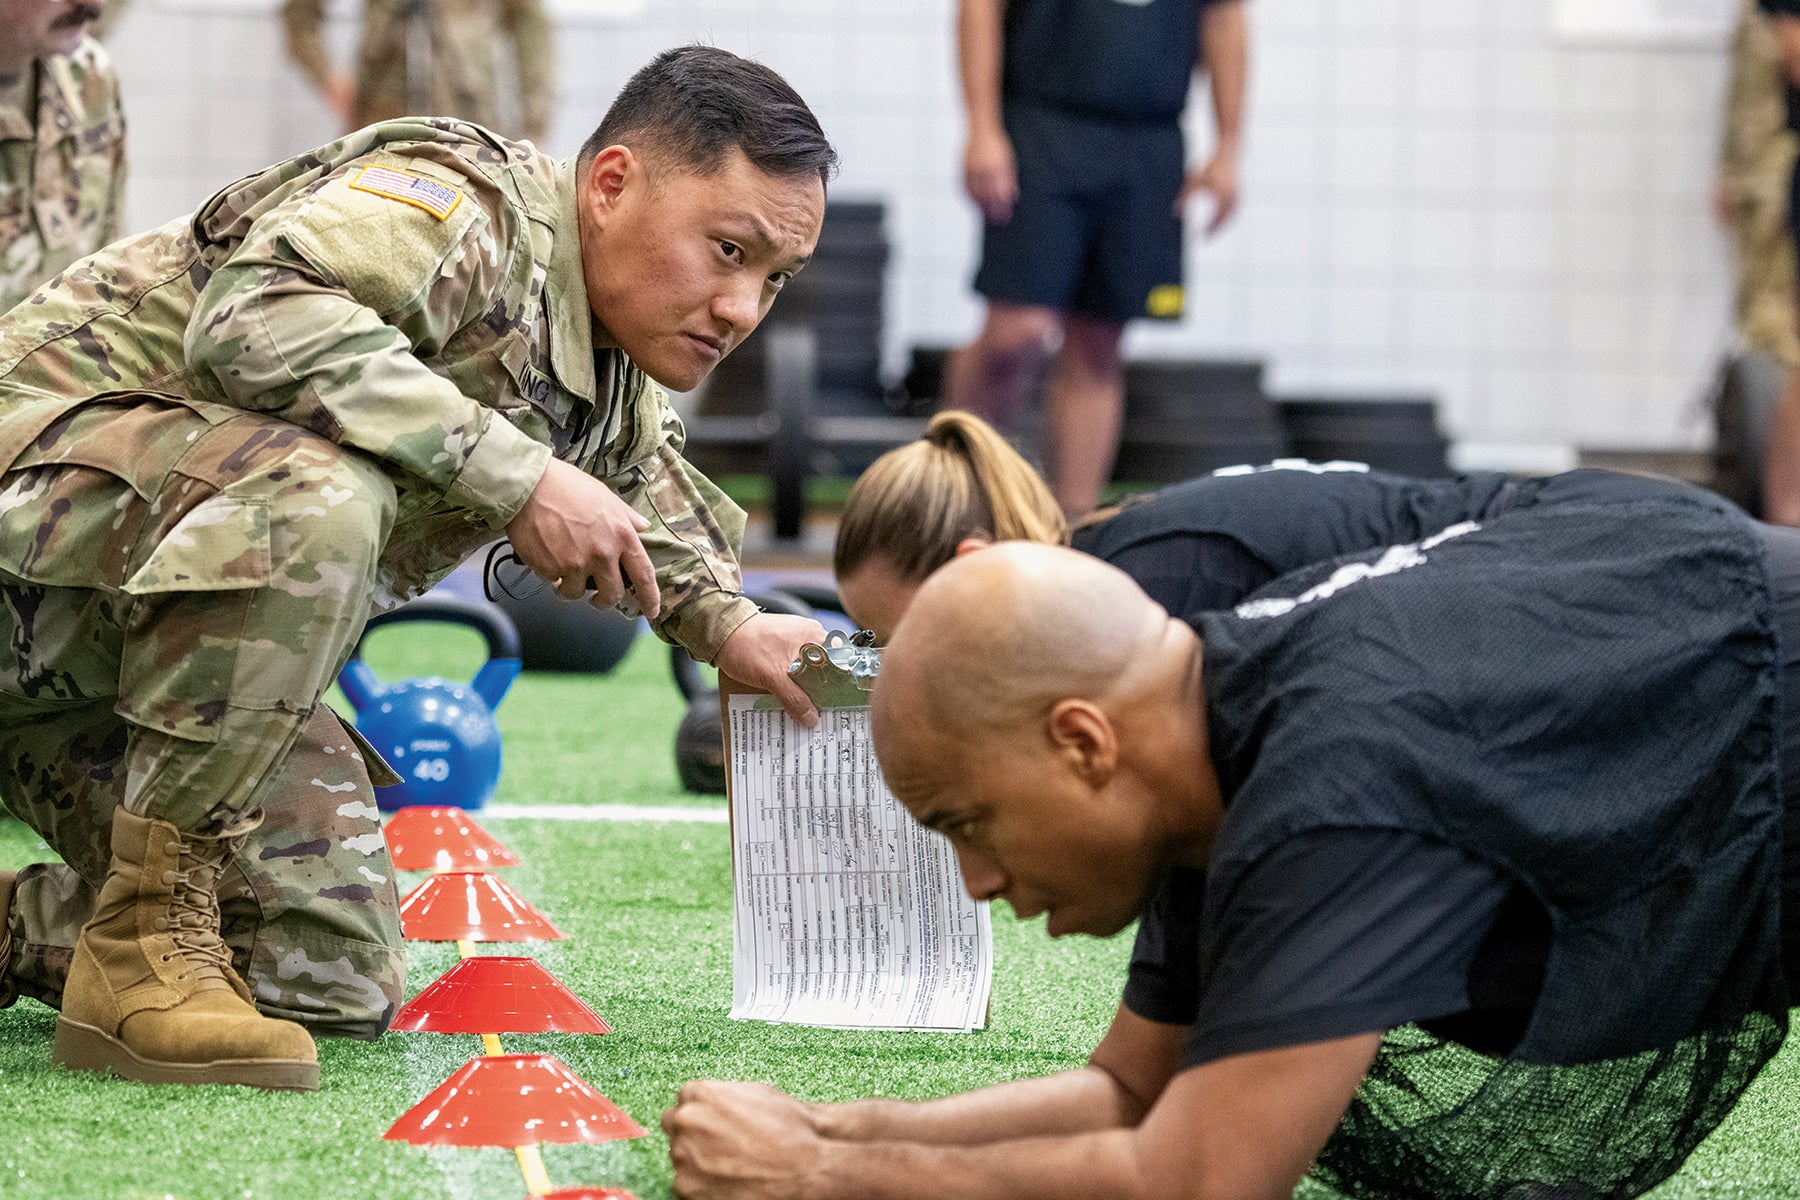 Sgt. 1st Class Vang Yang grades a candidate during the Army Combat Fitness Test portion of the Command Assessment Program at Fort Knox, Kentucky. (Credit: U.S. Army/Daniela Vestal)